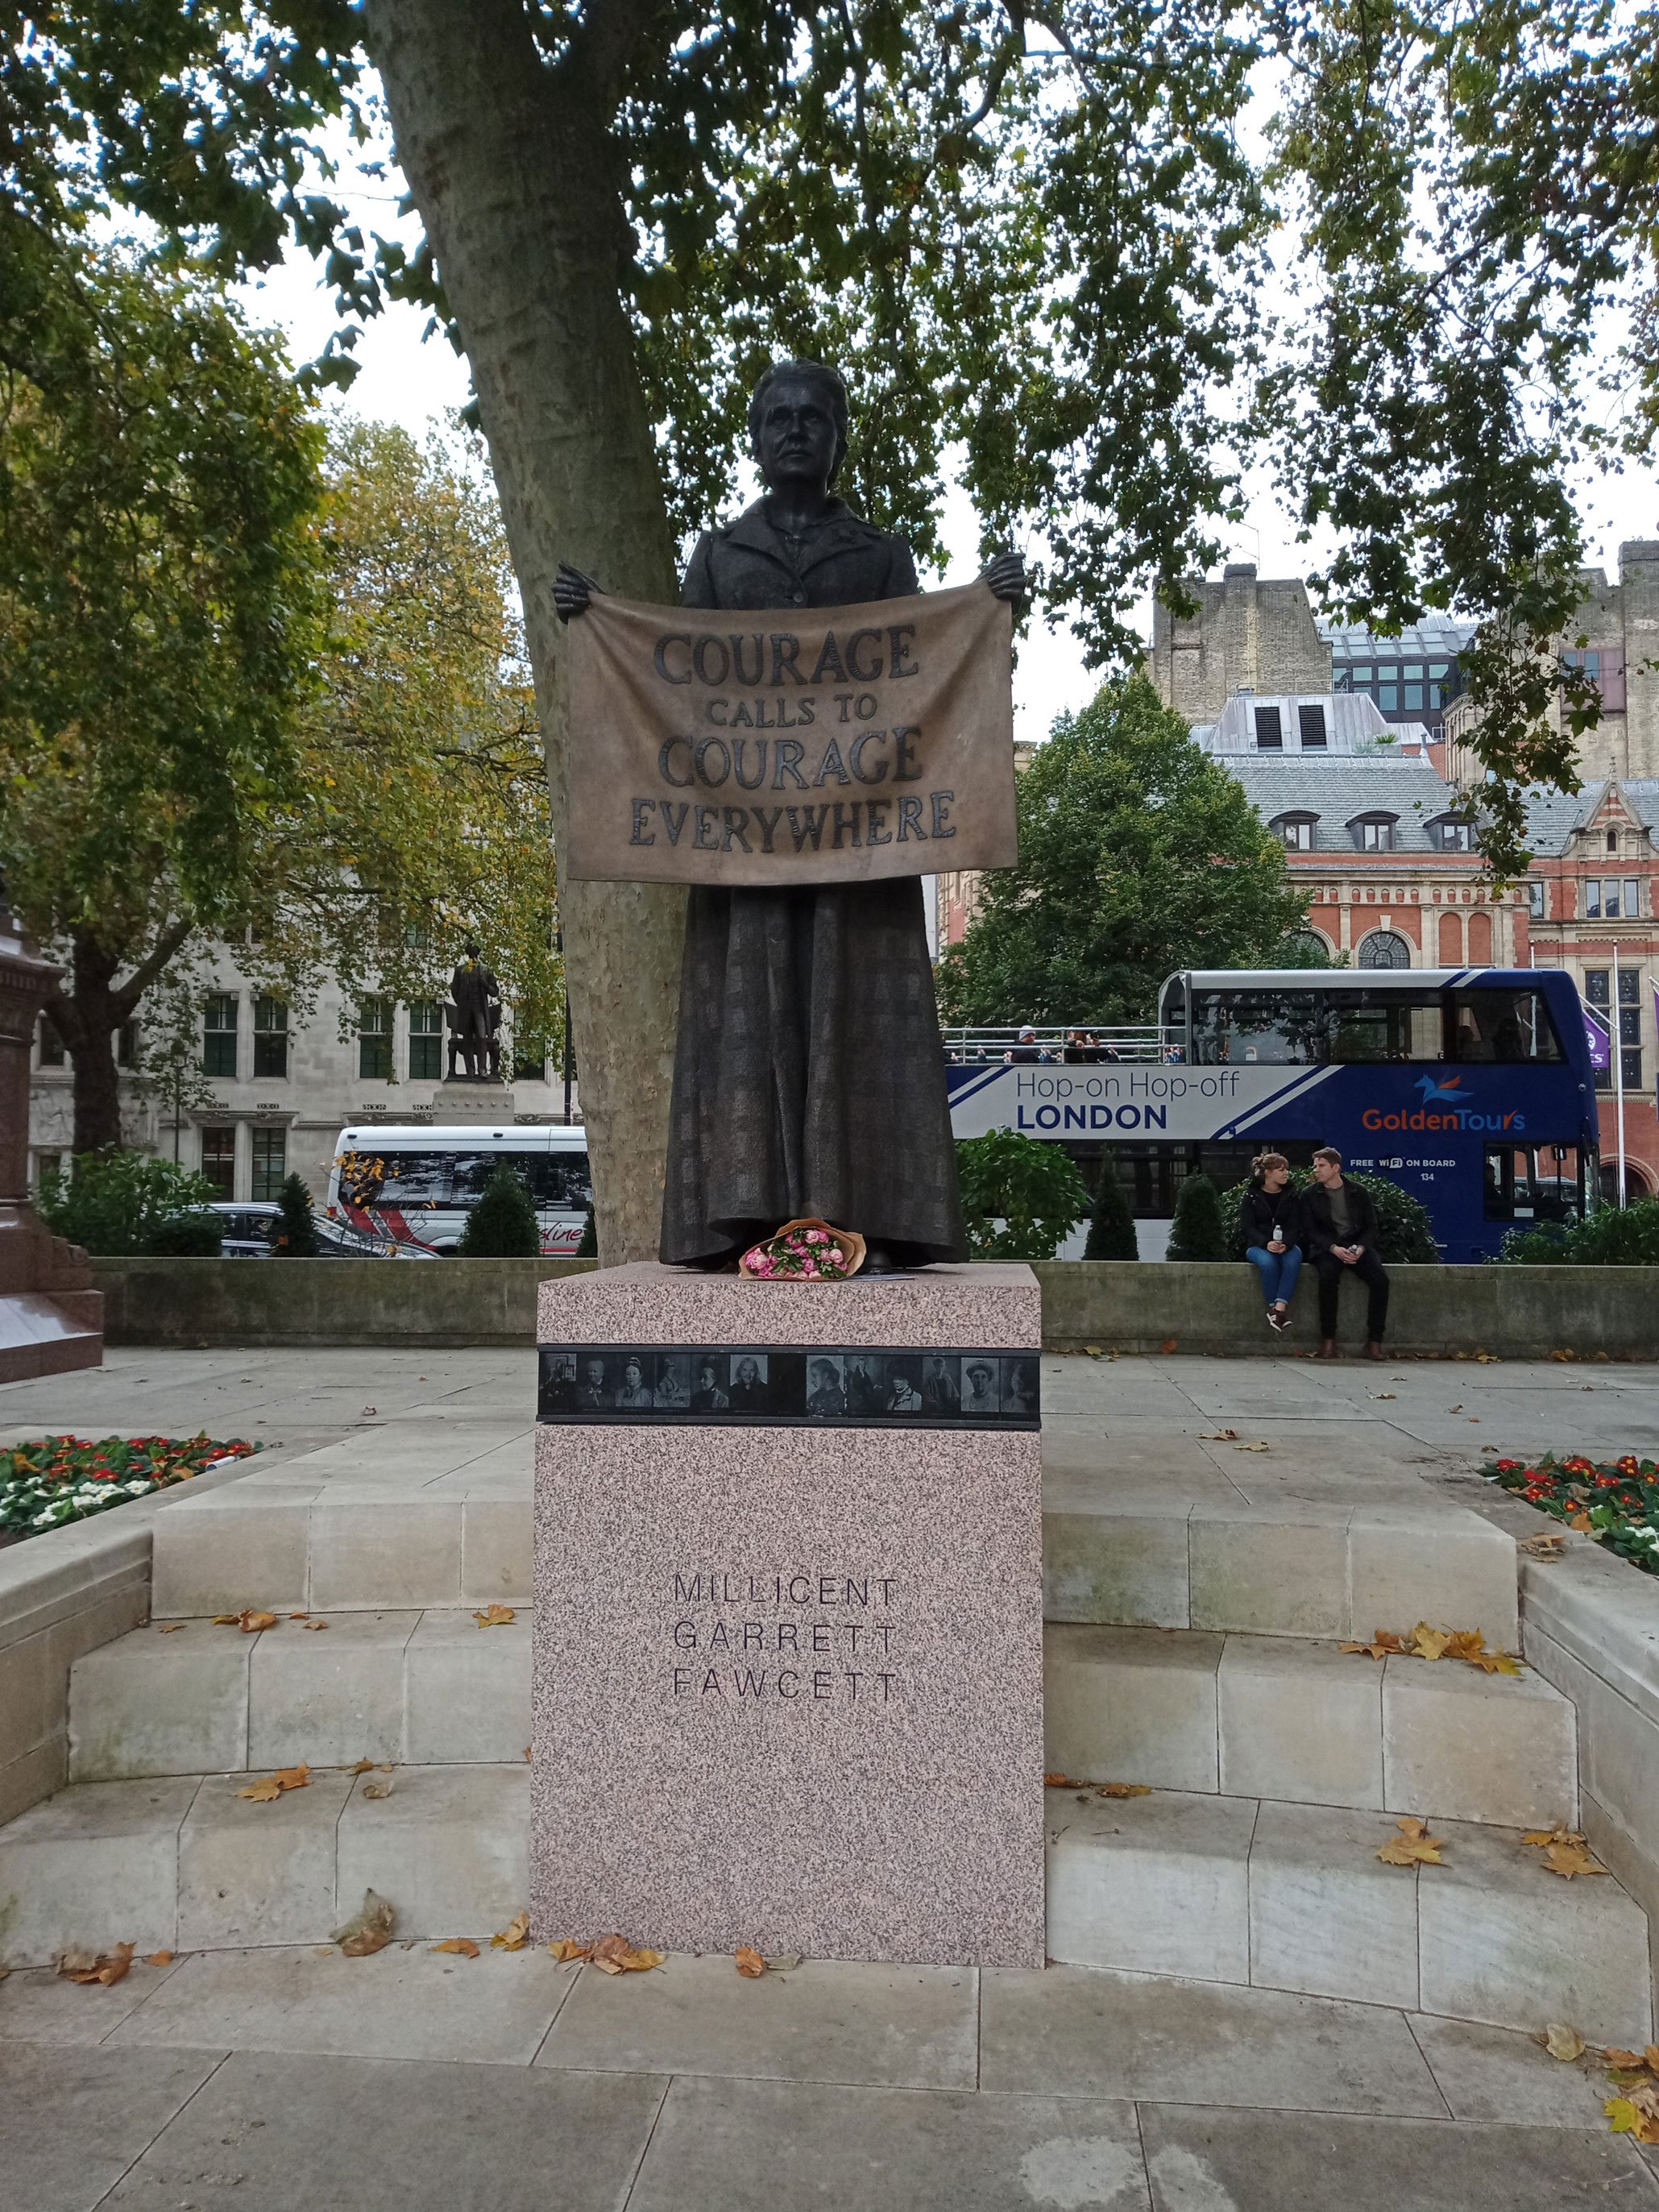 A bronze statue of a woman holding a banner in front of her which reads 'courage calls to courage everywhere'. On the plinth are small portraits of other women.